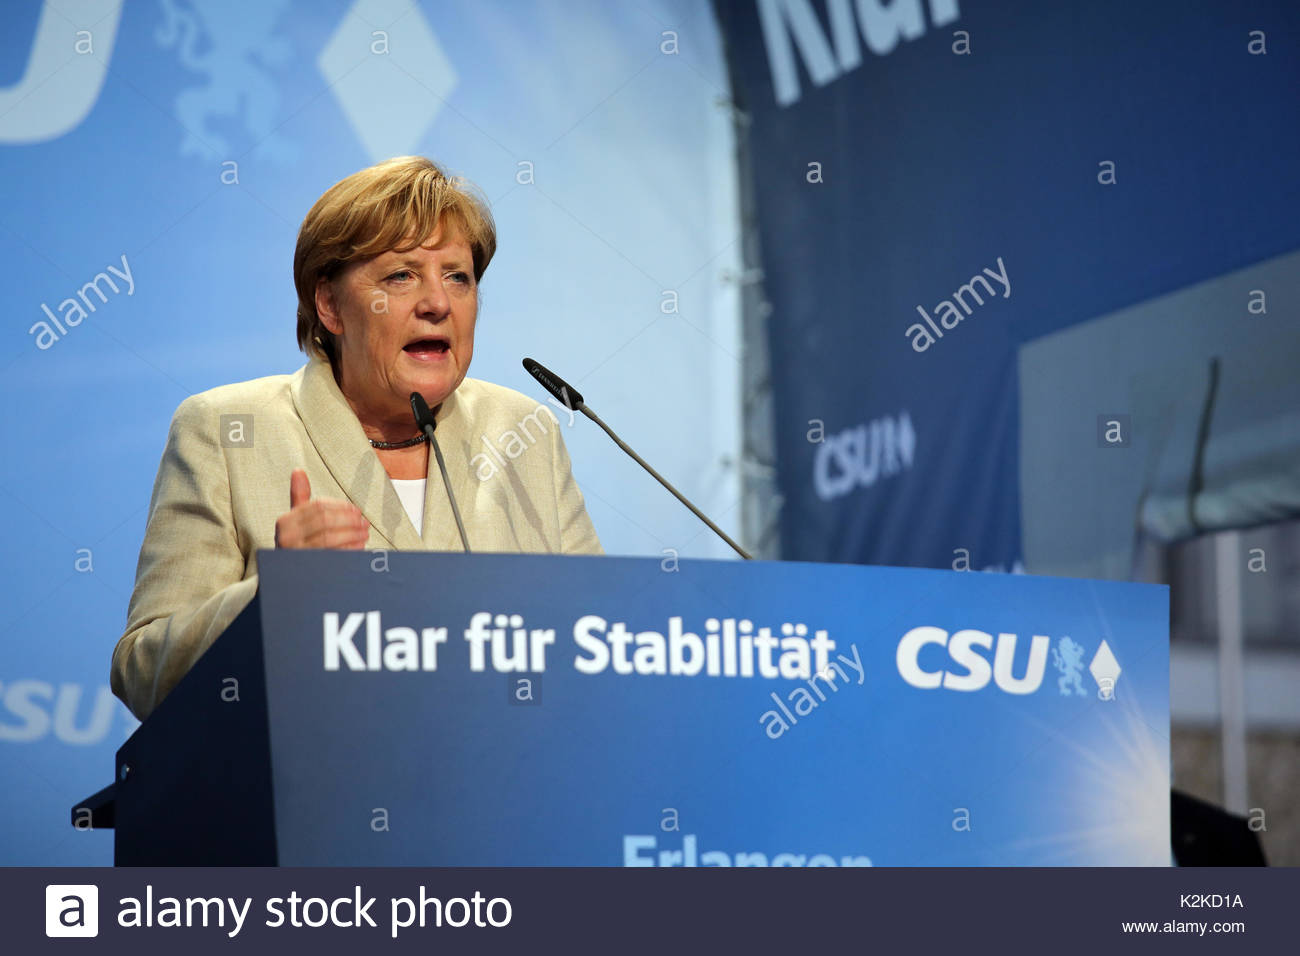 An expressive gesture as Angela Merkel speaks to a large crowd on the campaign trail in the run up to the German election which is taking place on Sunday, September 24.Merkel spoke for over forty minutes and was well received though a small group of protestors tried to interrupt her speech with whistles and catcalls. Stock Photo